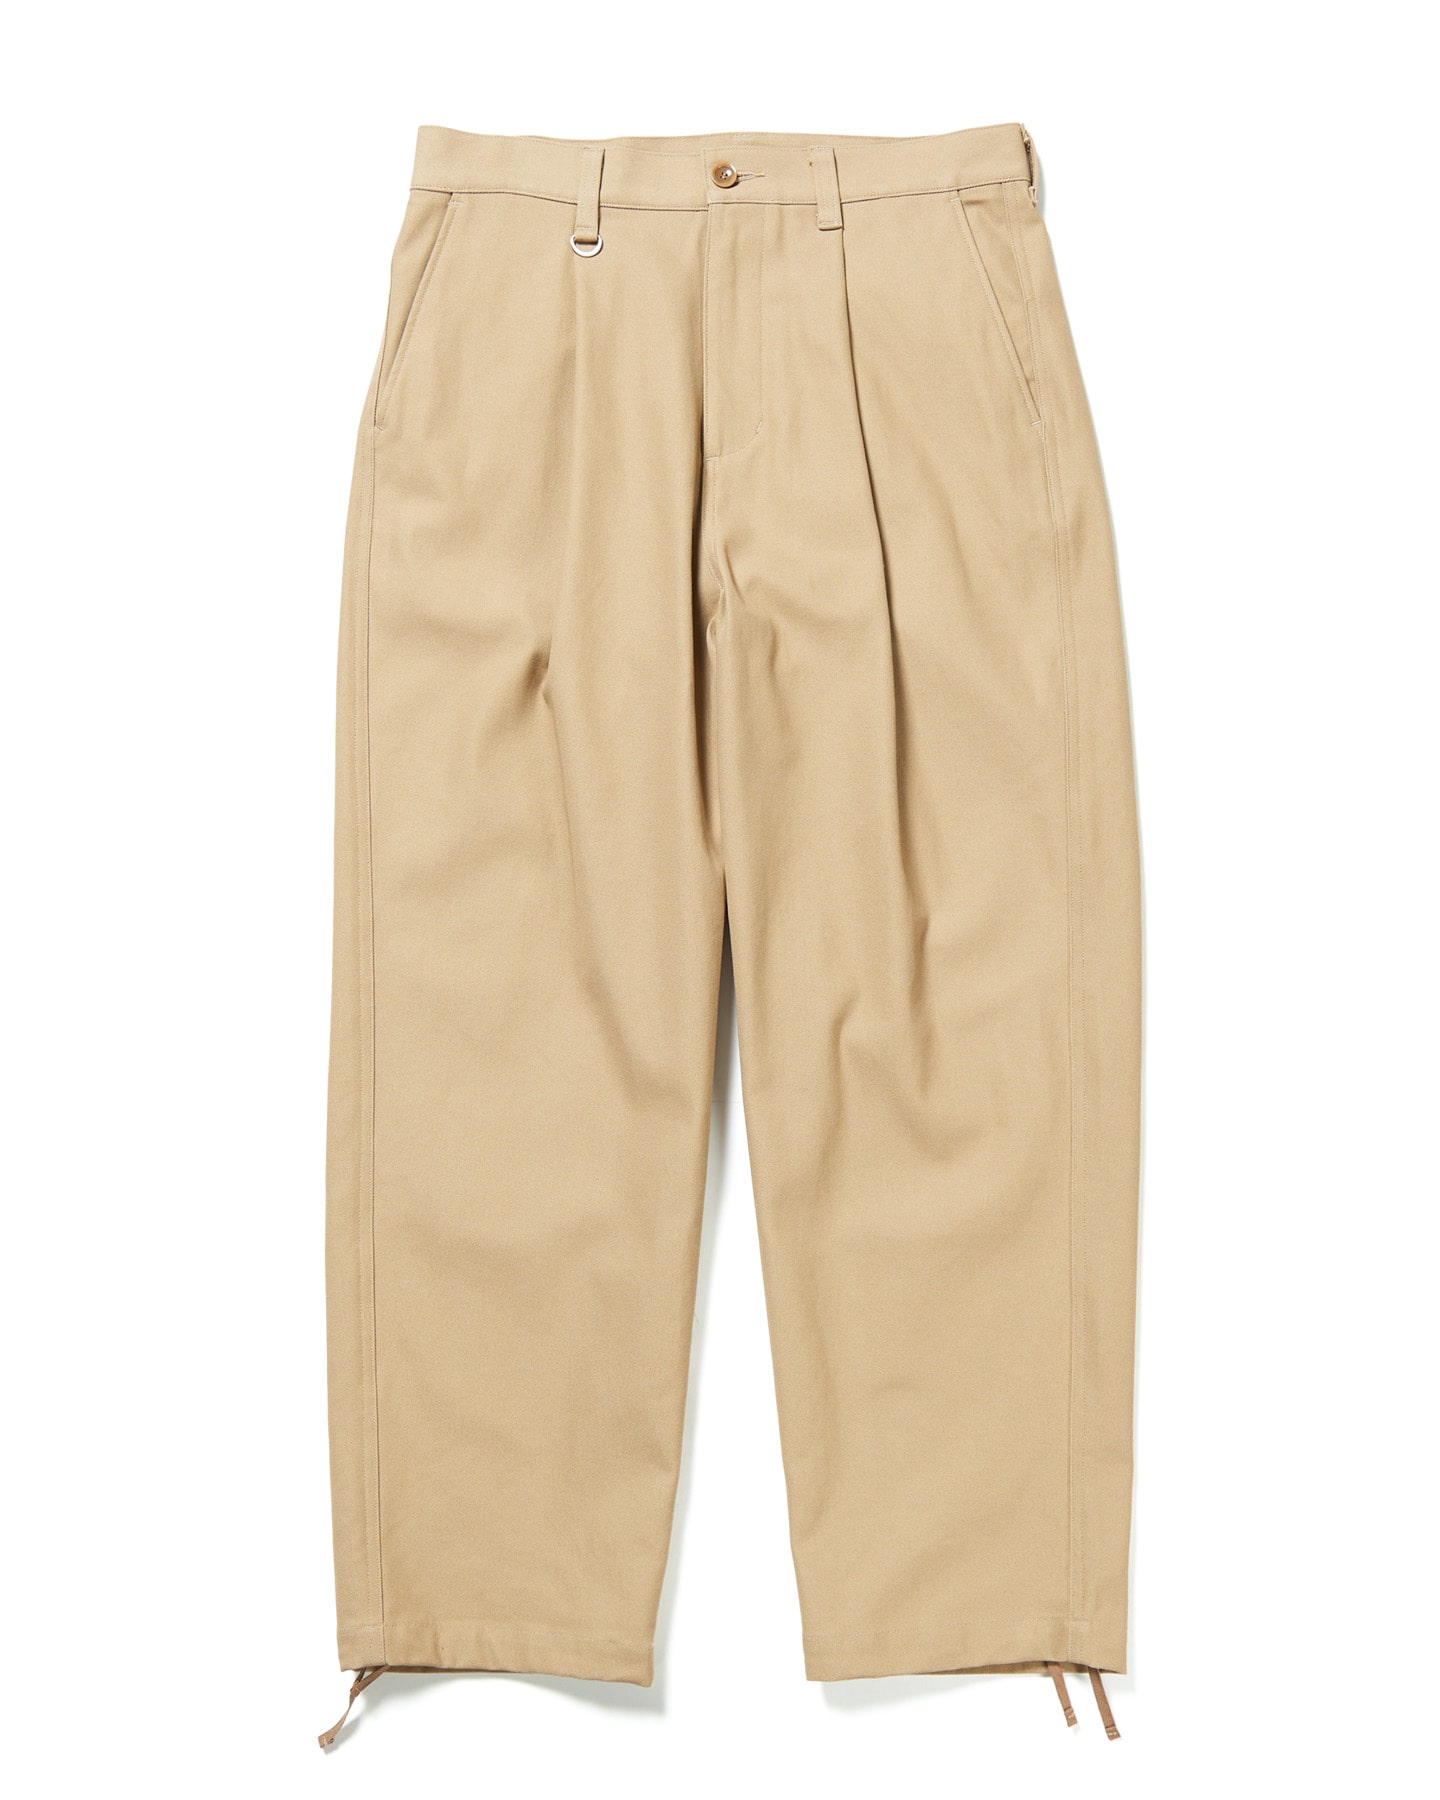 SOPH. | HIGH TWISTED WASHER COTTON SERGE 1TUCK WIDE TAPERED PANTS 